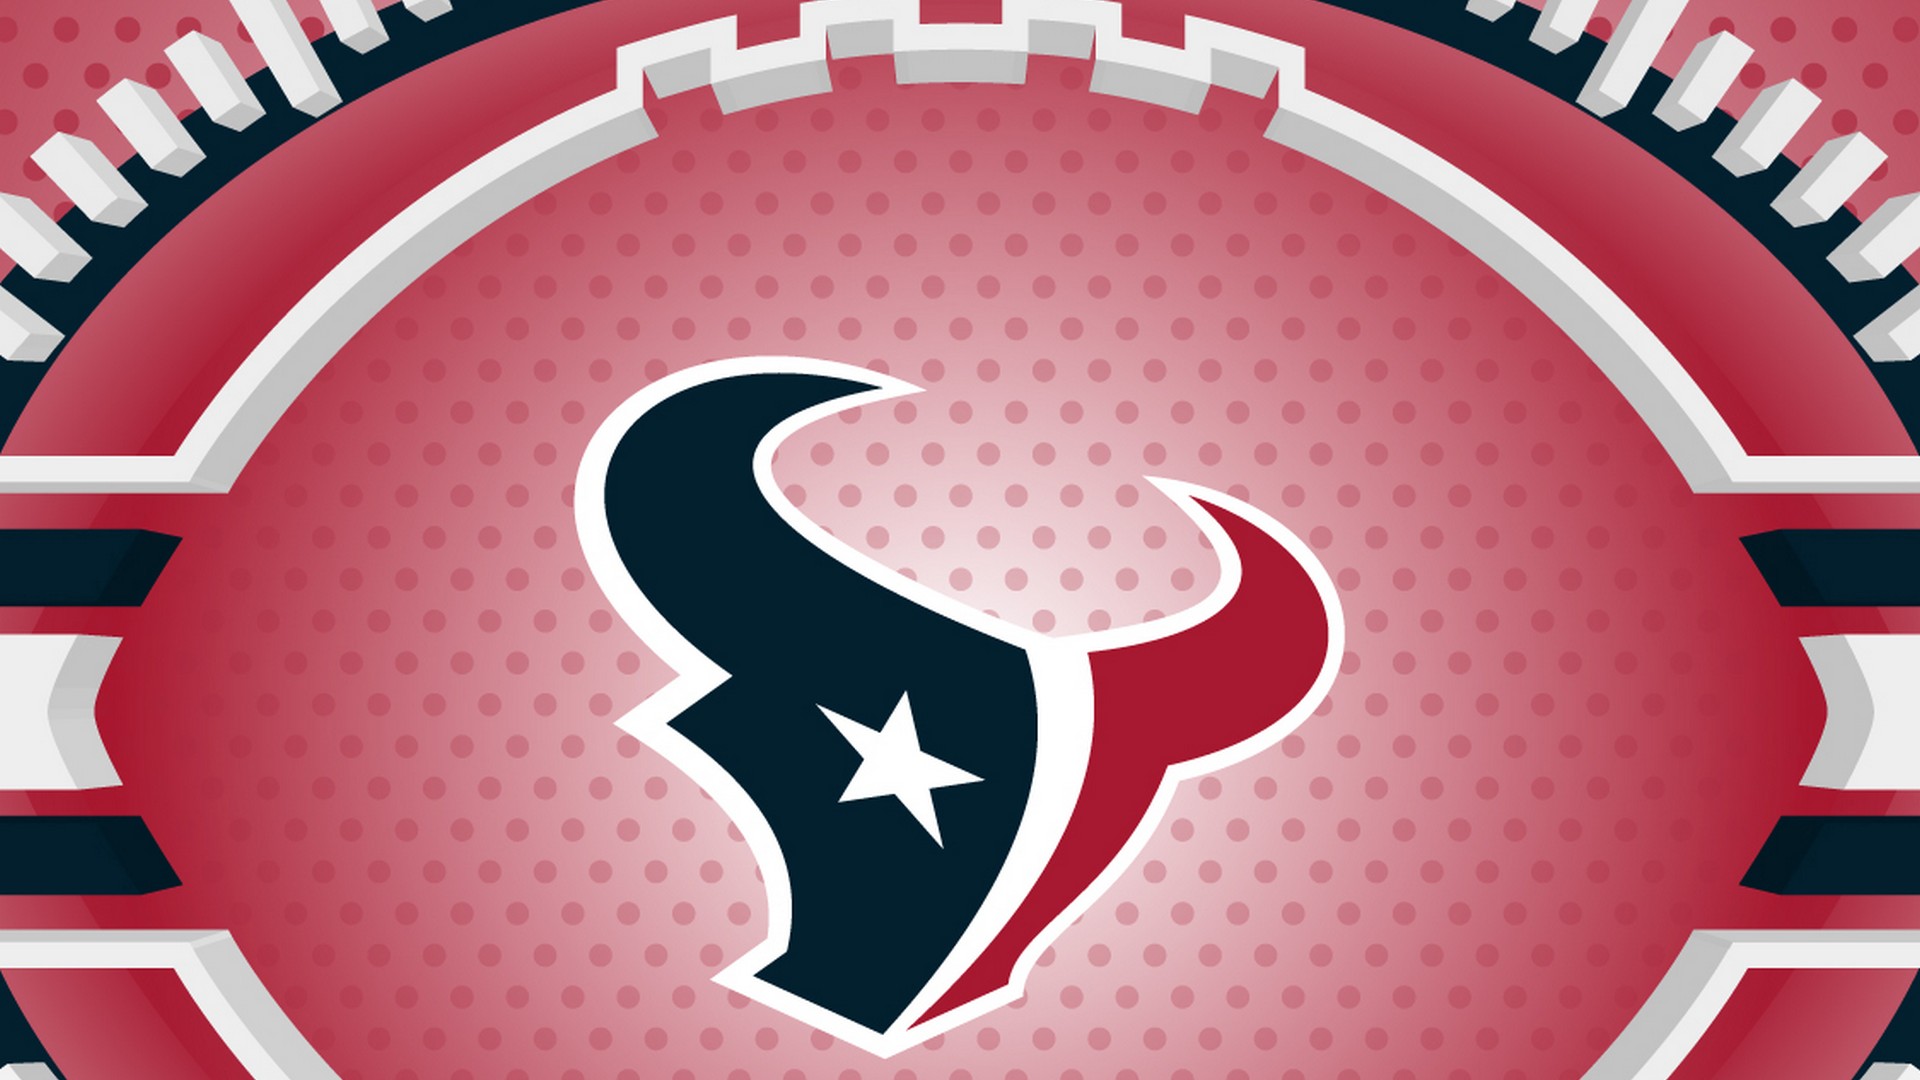 Wallpapers HD Houston Texans NFL With Resolution 1920X1080 pixel. You can make this wallpaper for your Mac or Windows Desktop Background, iPhone, Android or Tablet and another Smartphone device for free